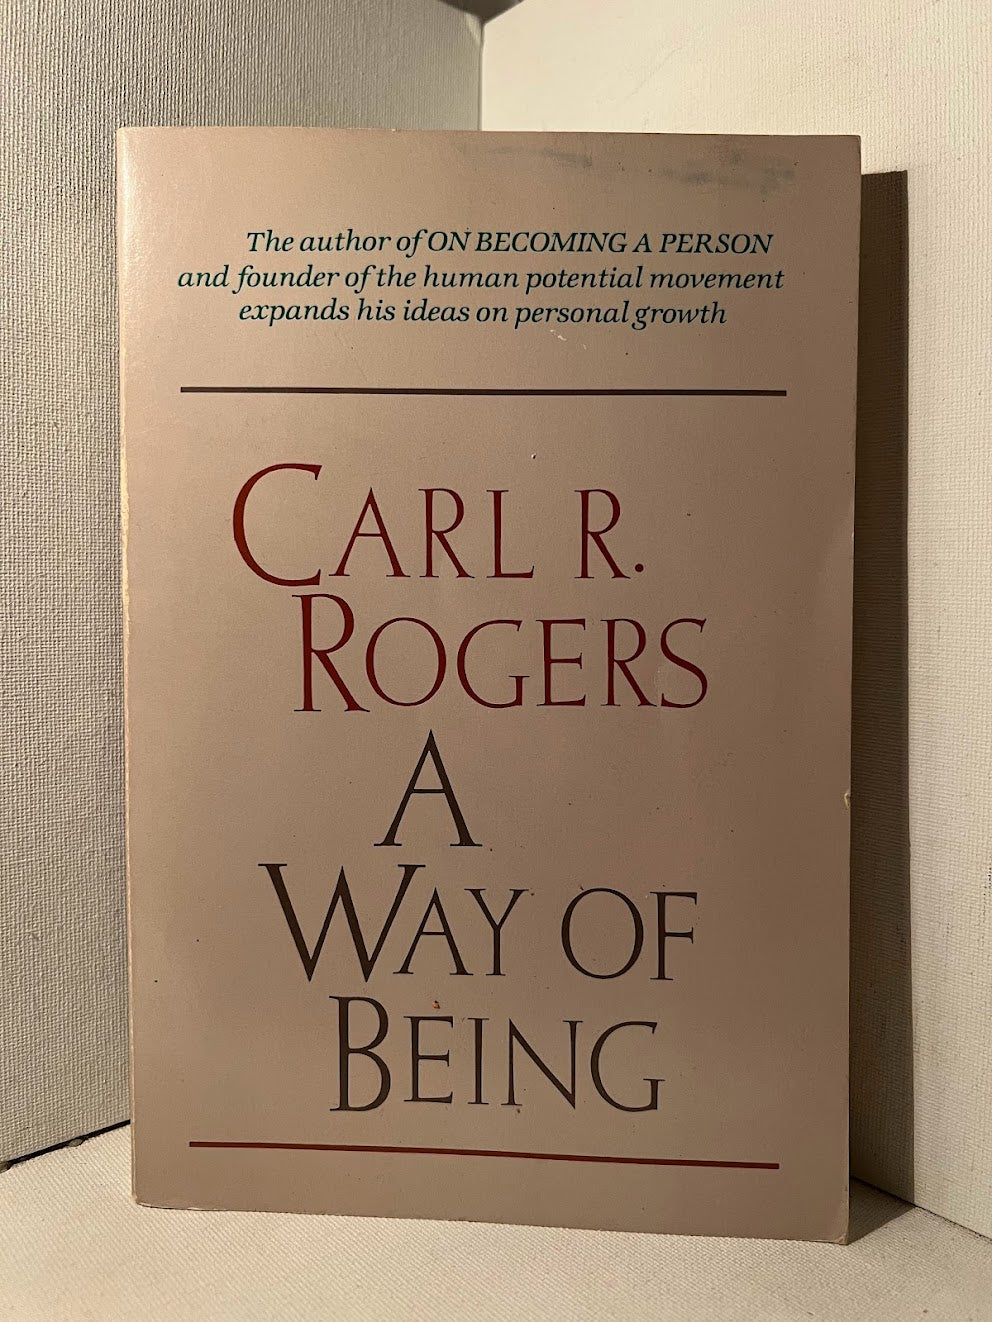 A Way of Being by Carl R. Rogers